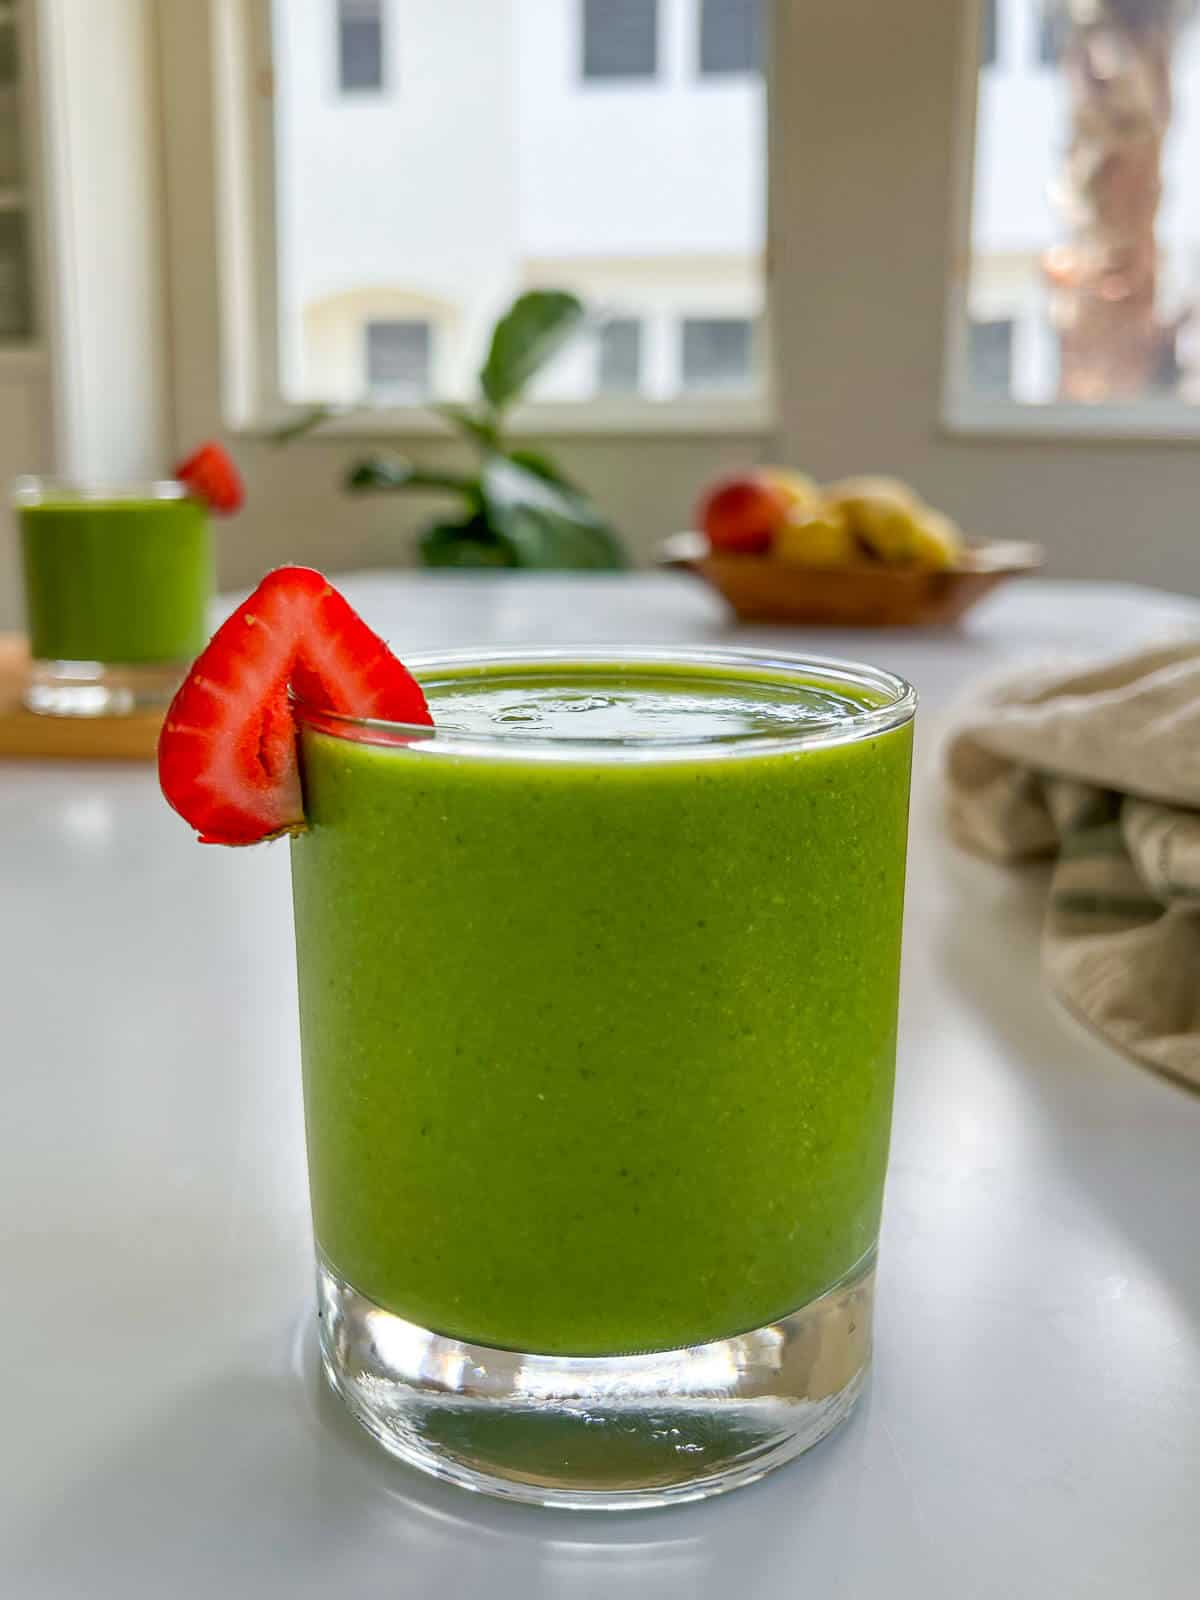 strawberry spinach banana smoothie on a table.